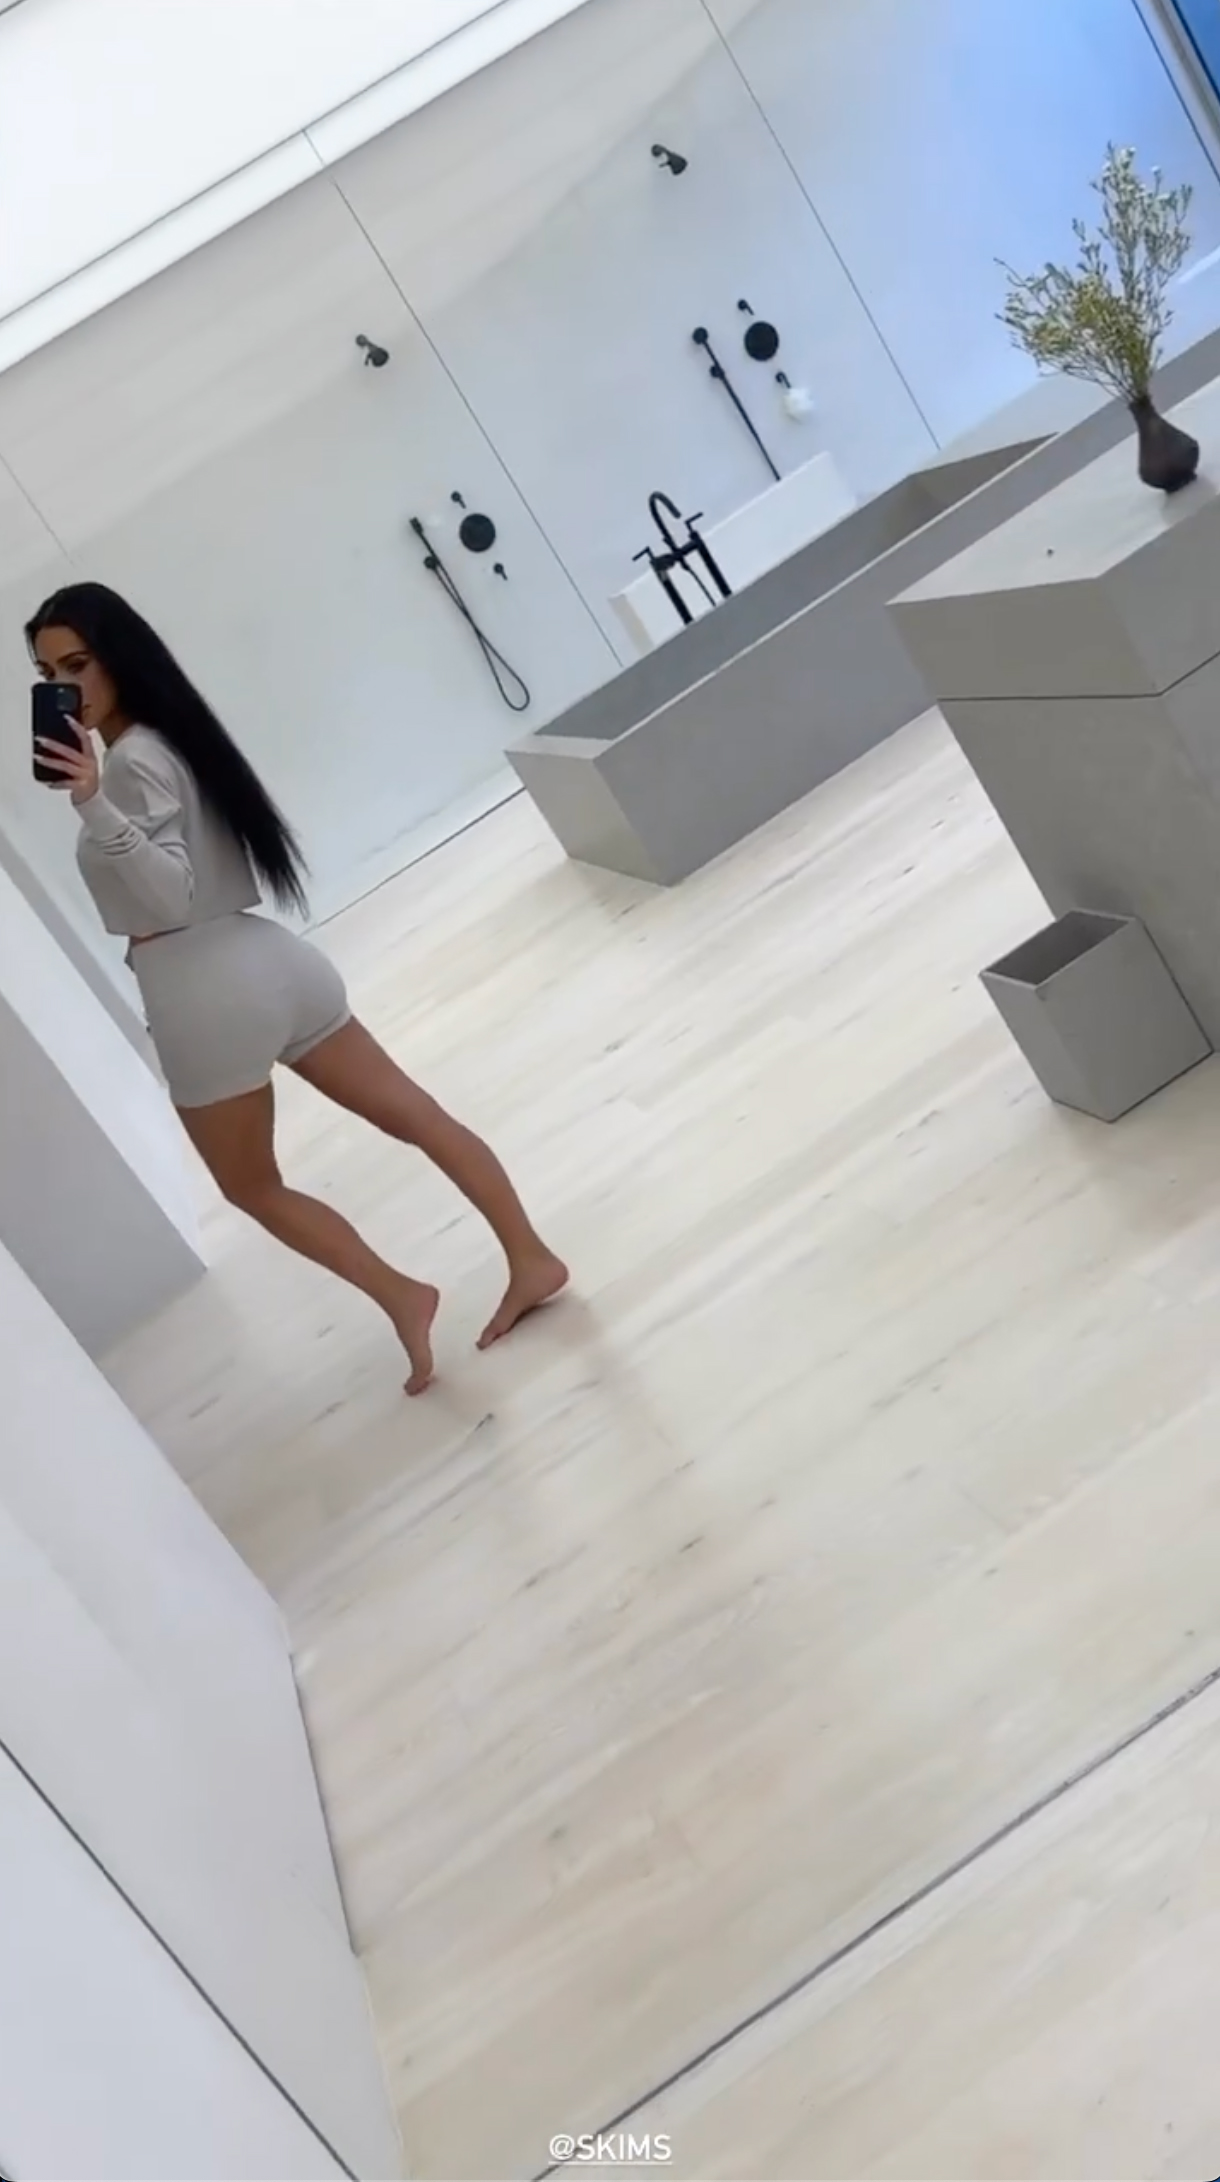 Kim frequently shows off the minimalist space